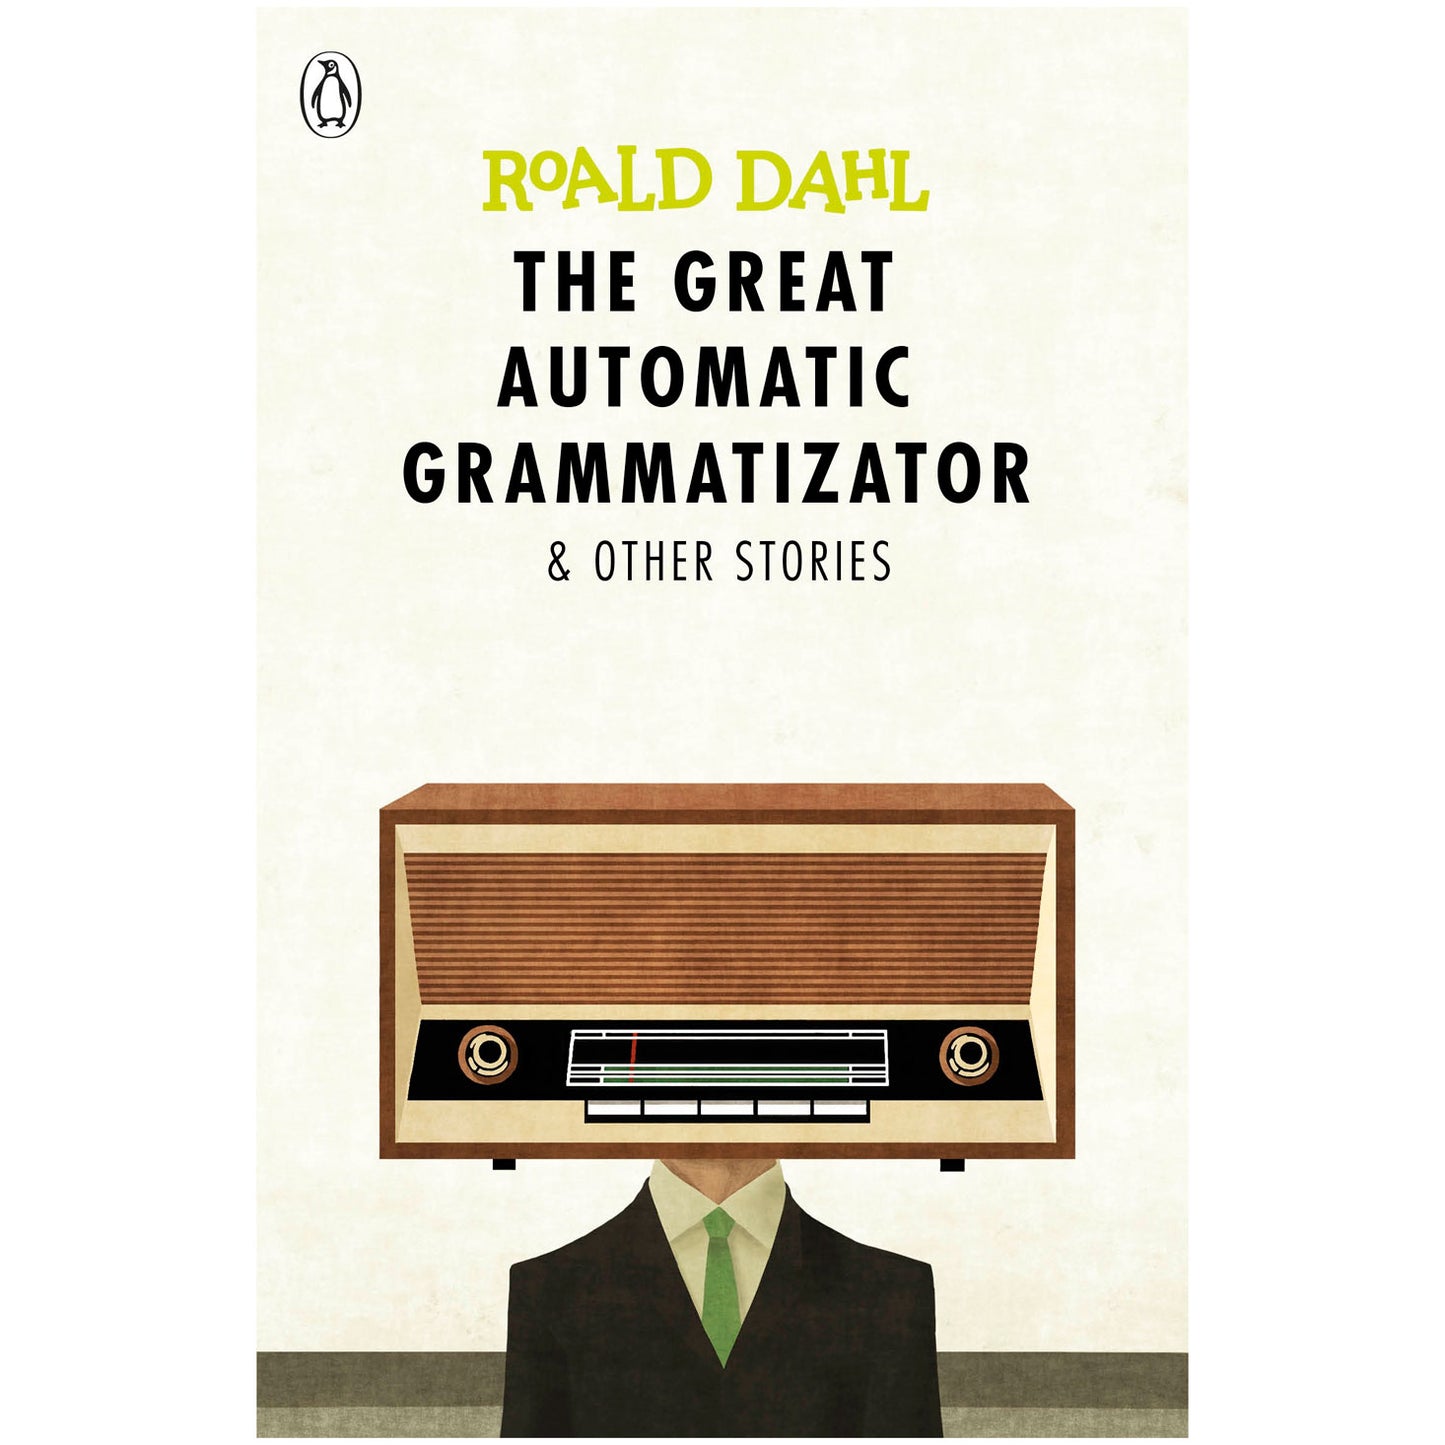 The Great Automatic Grammatizator and Other Stories by Roald Dah;